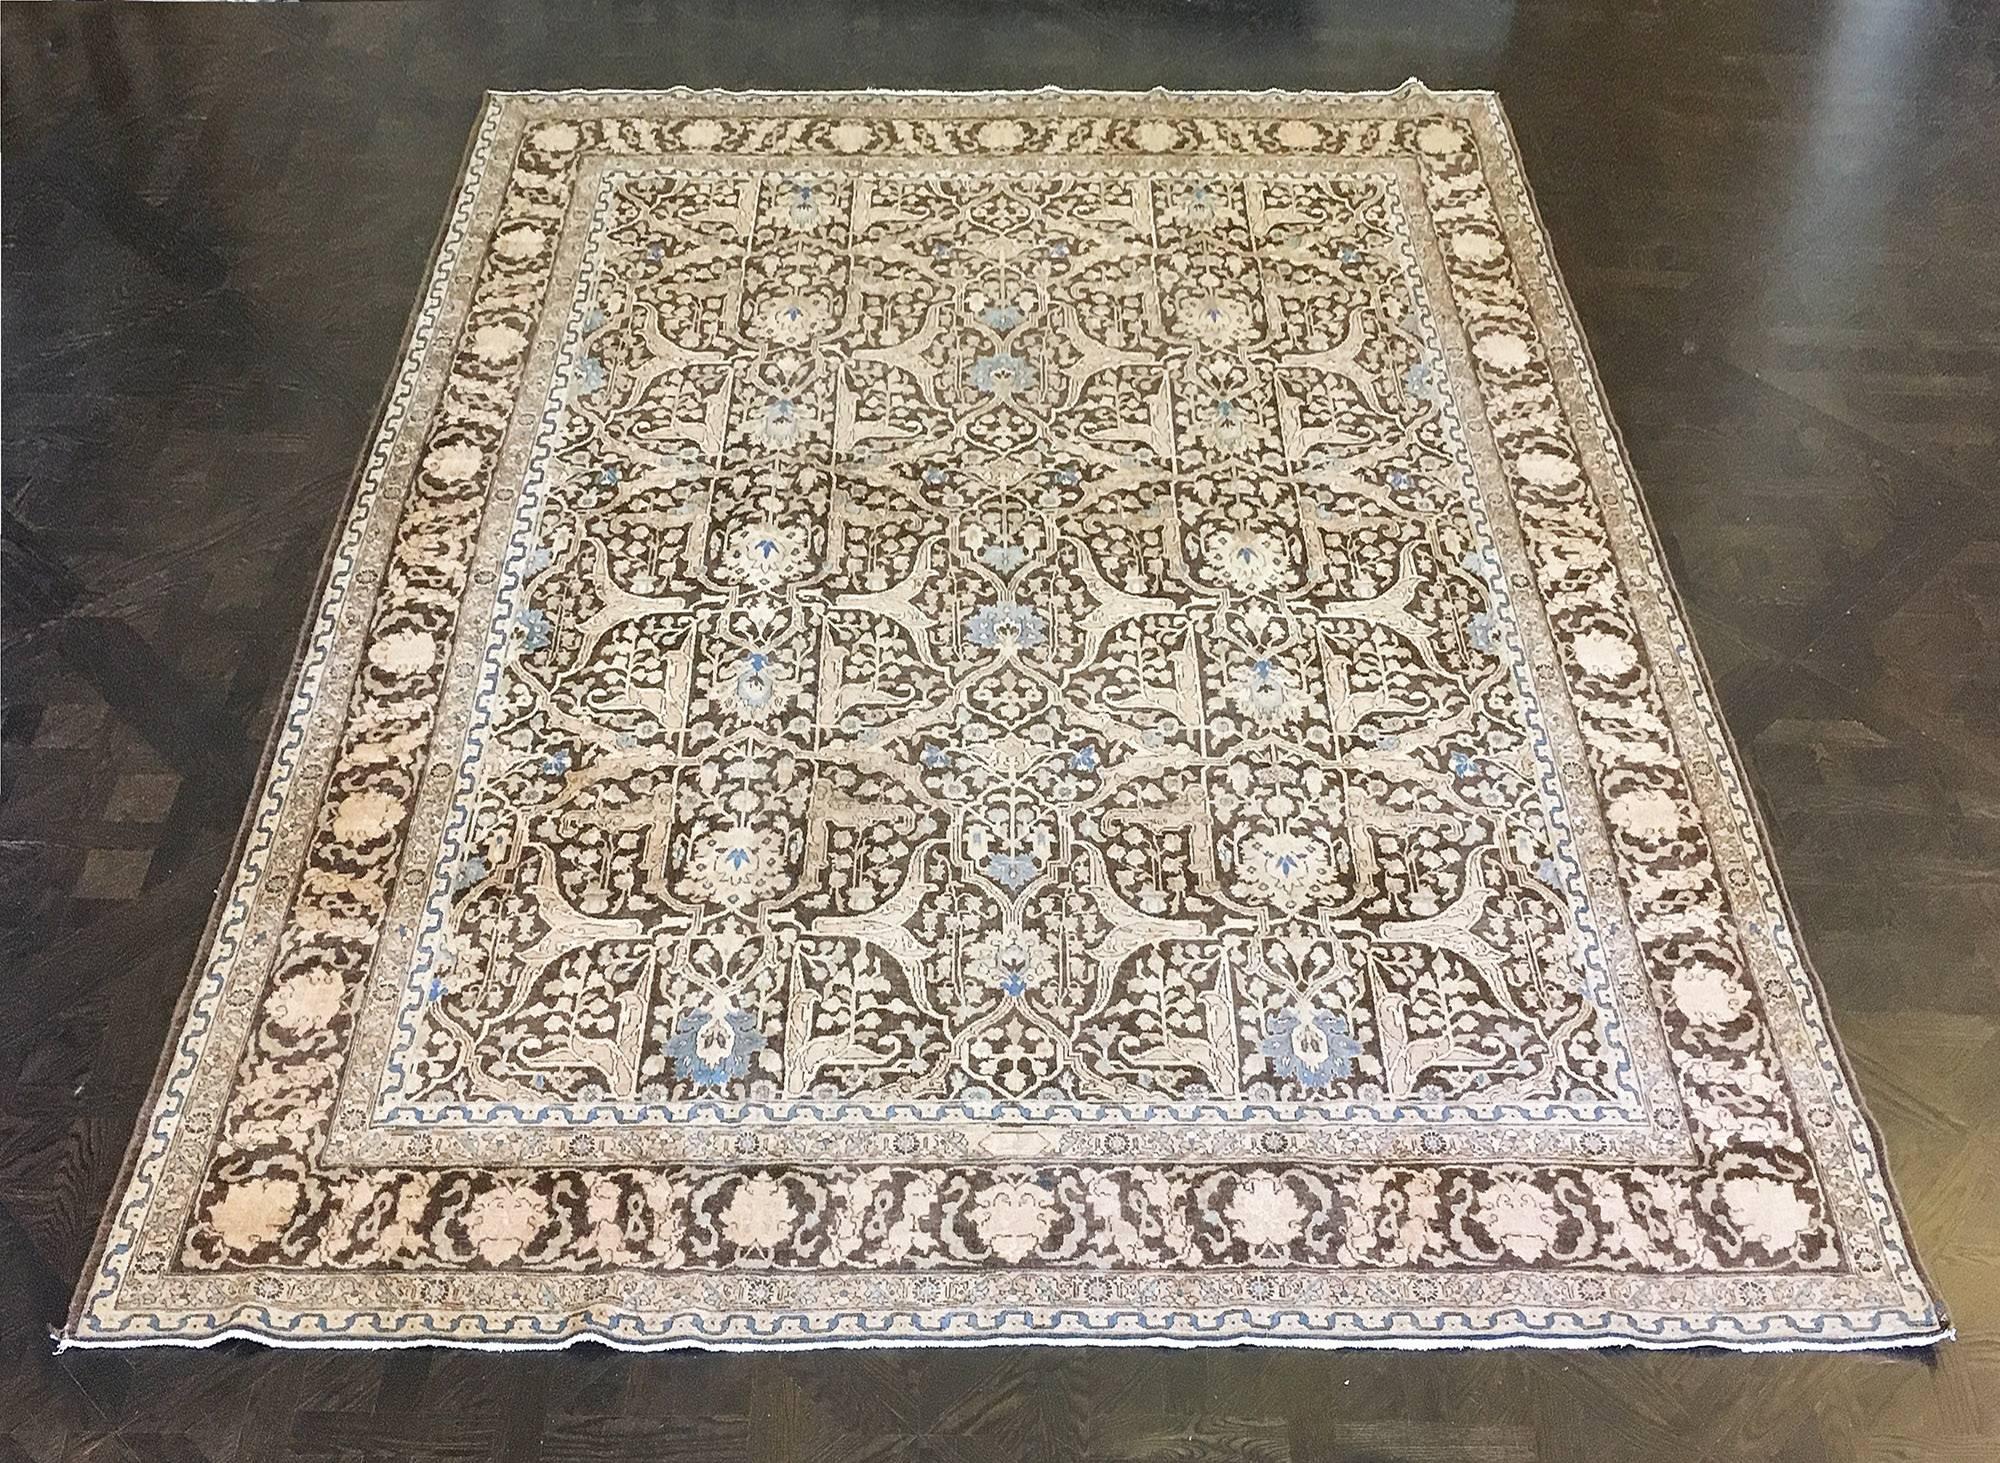 This traditional handwoven Persian Tabriz rug has a deep mahogany field with overall ornate Garrus design, in a mahogany meandering palmette border, between elegant vine and geometric stripes.